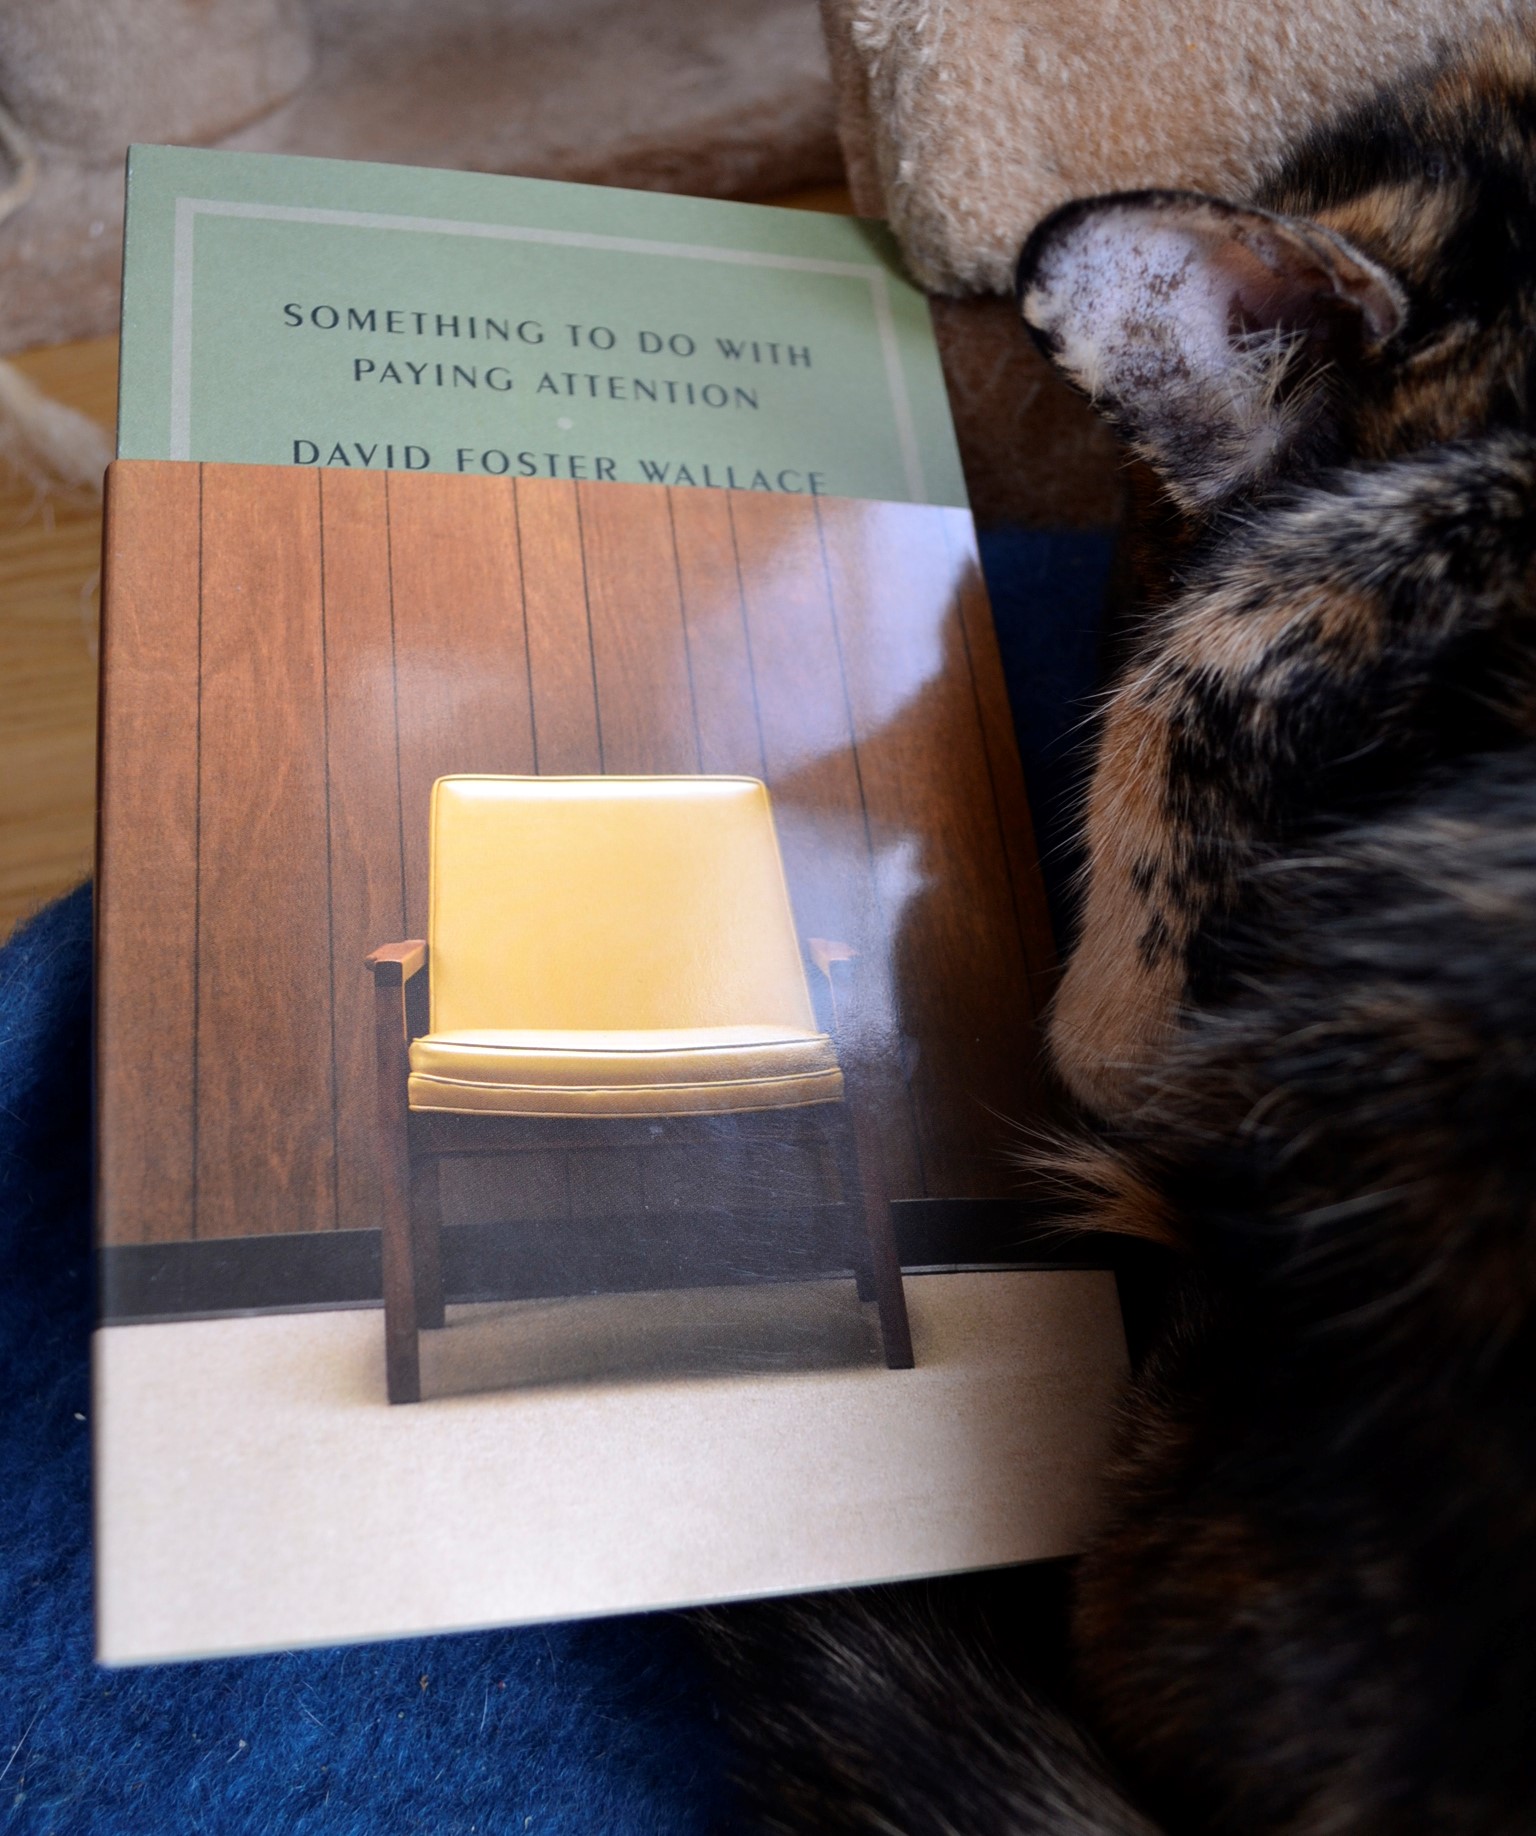 A tortoiseshell cat sleeps curled up beside a copy of Something to do With Paying Attention by David Foster Wallace.